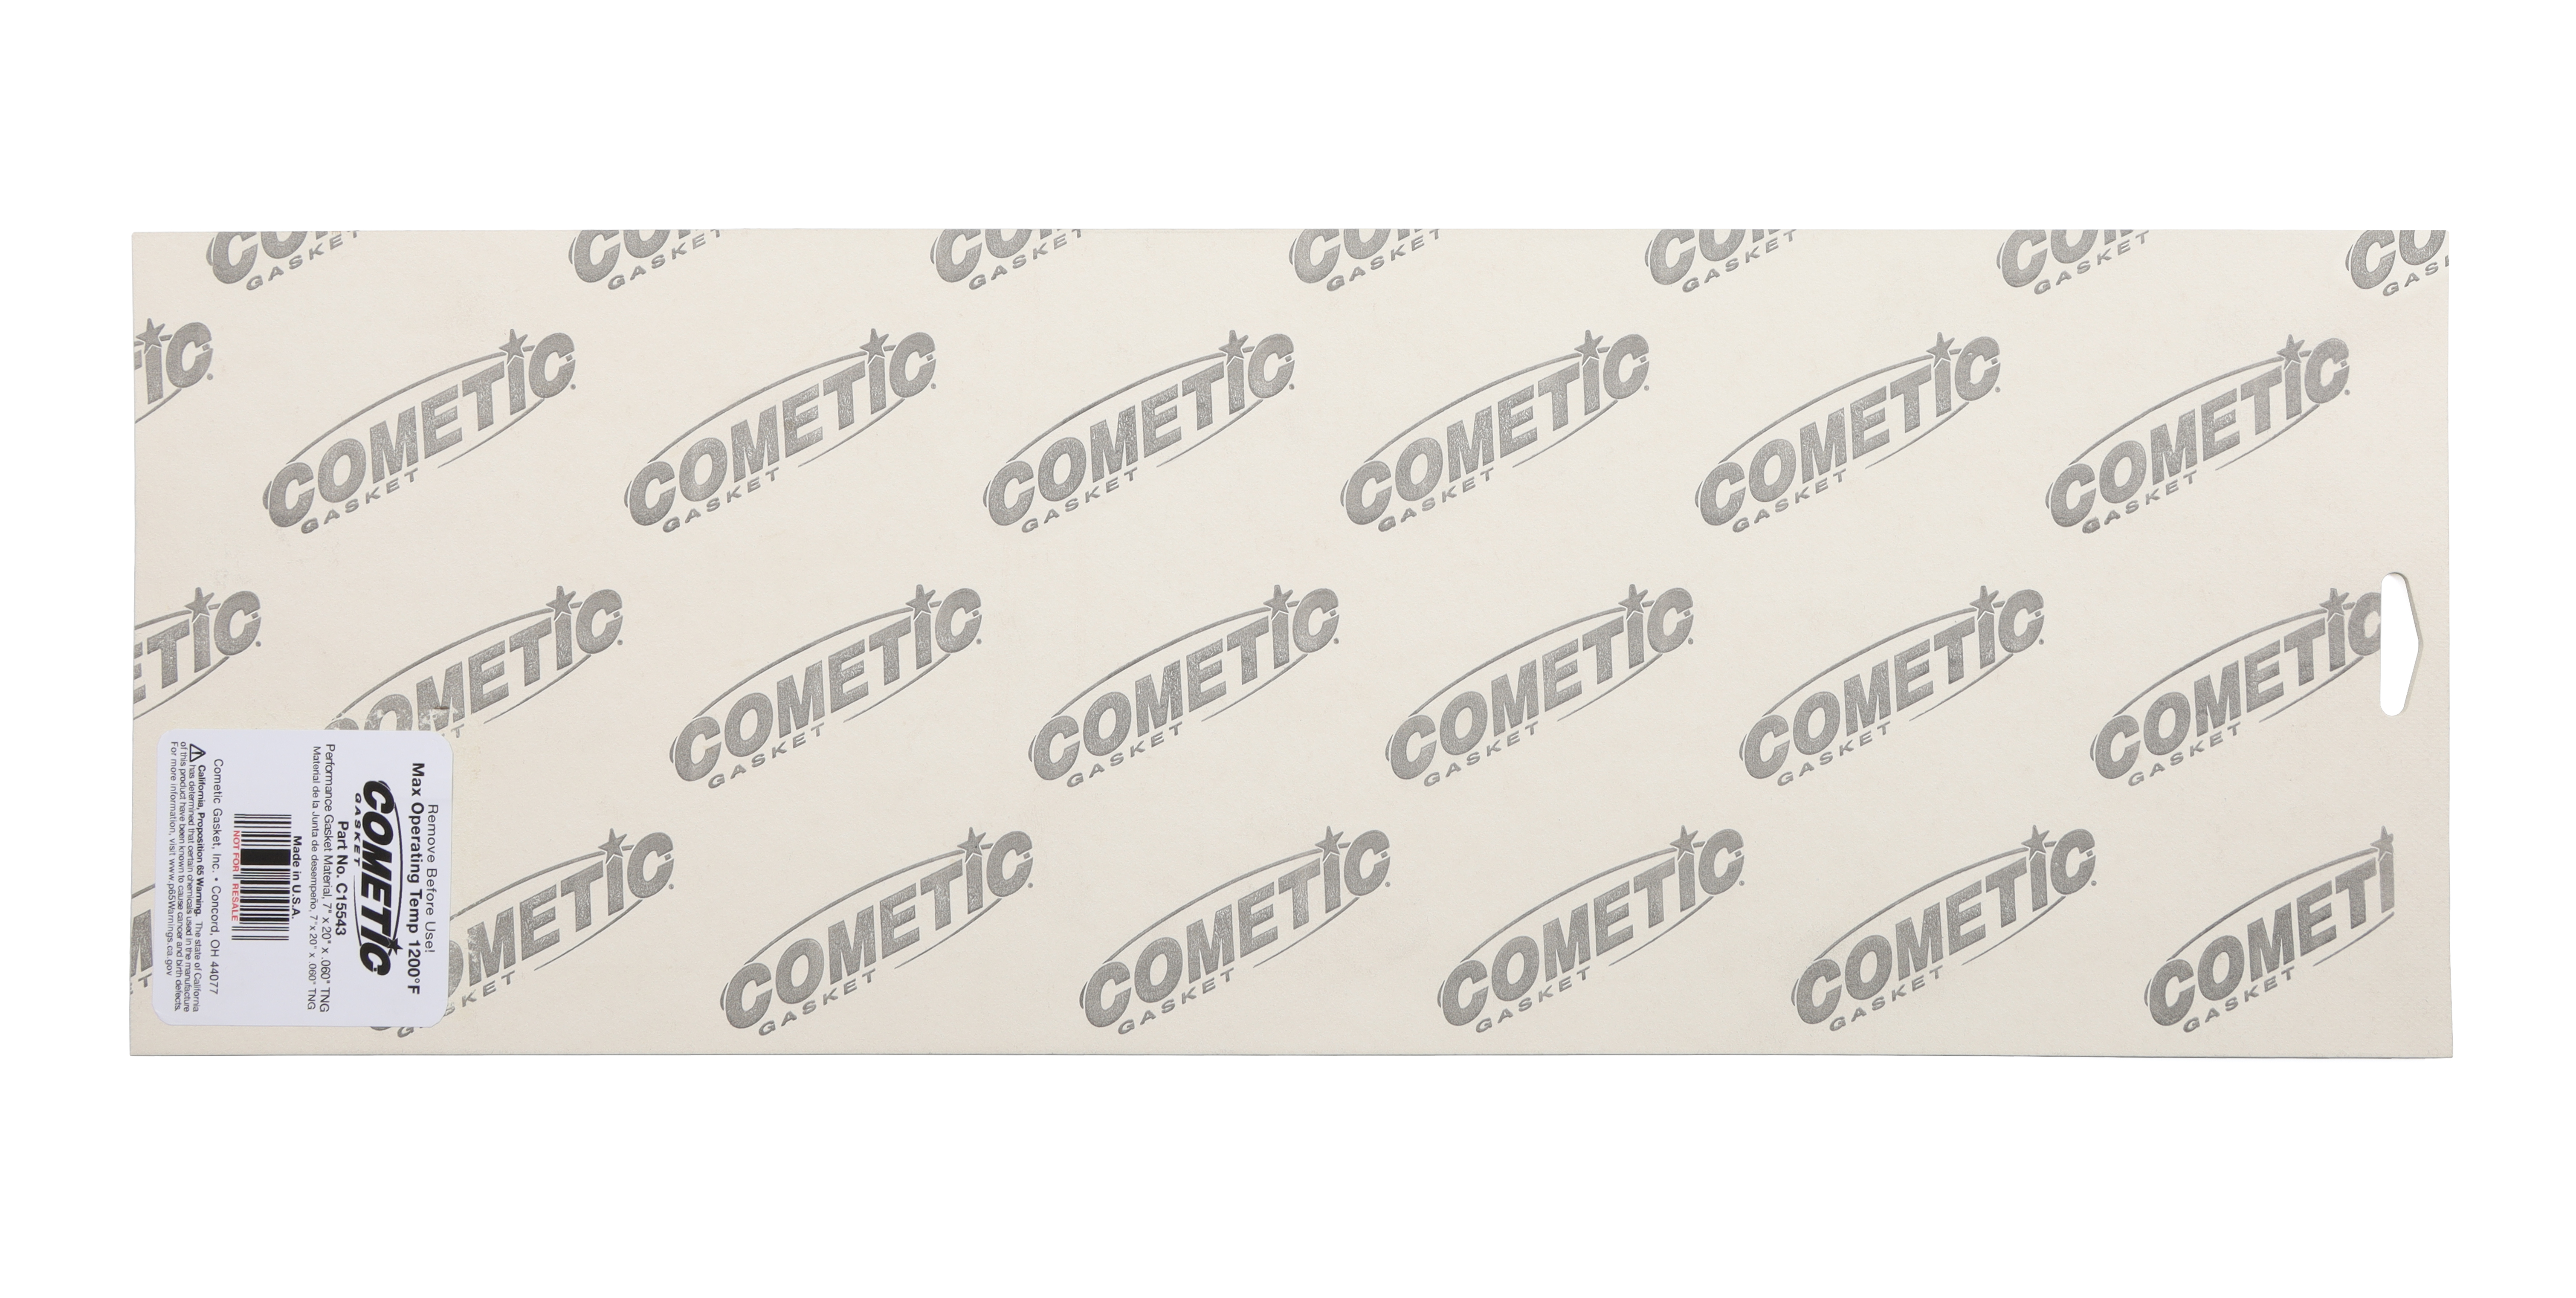 Cometic Automotive 20" x 7" x .060" TNG Gasket Making Material